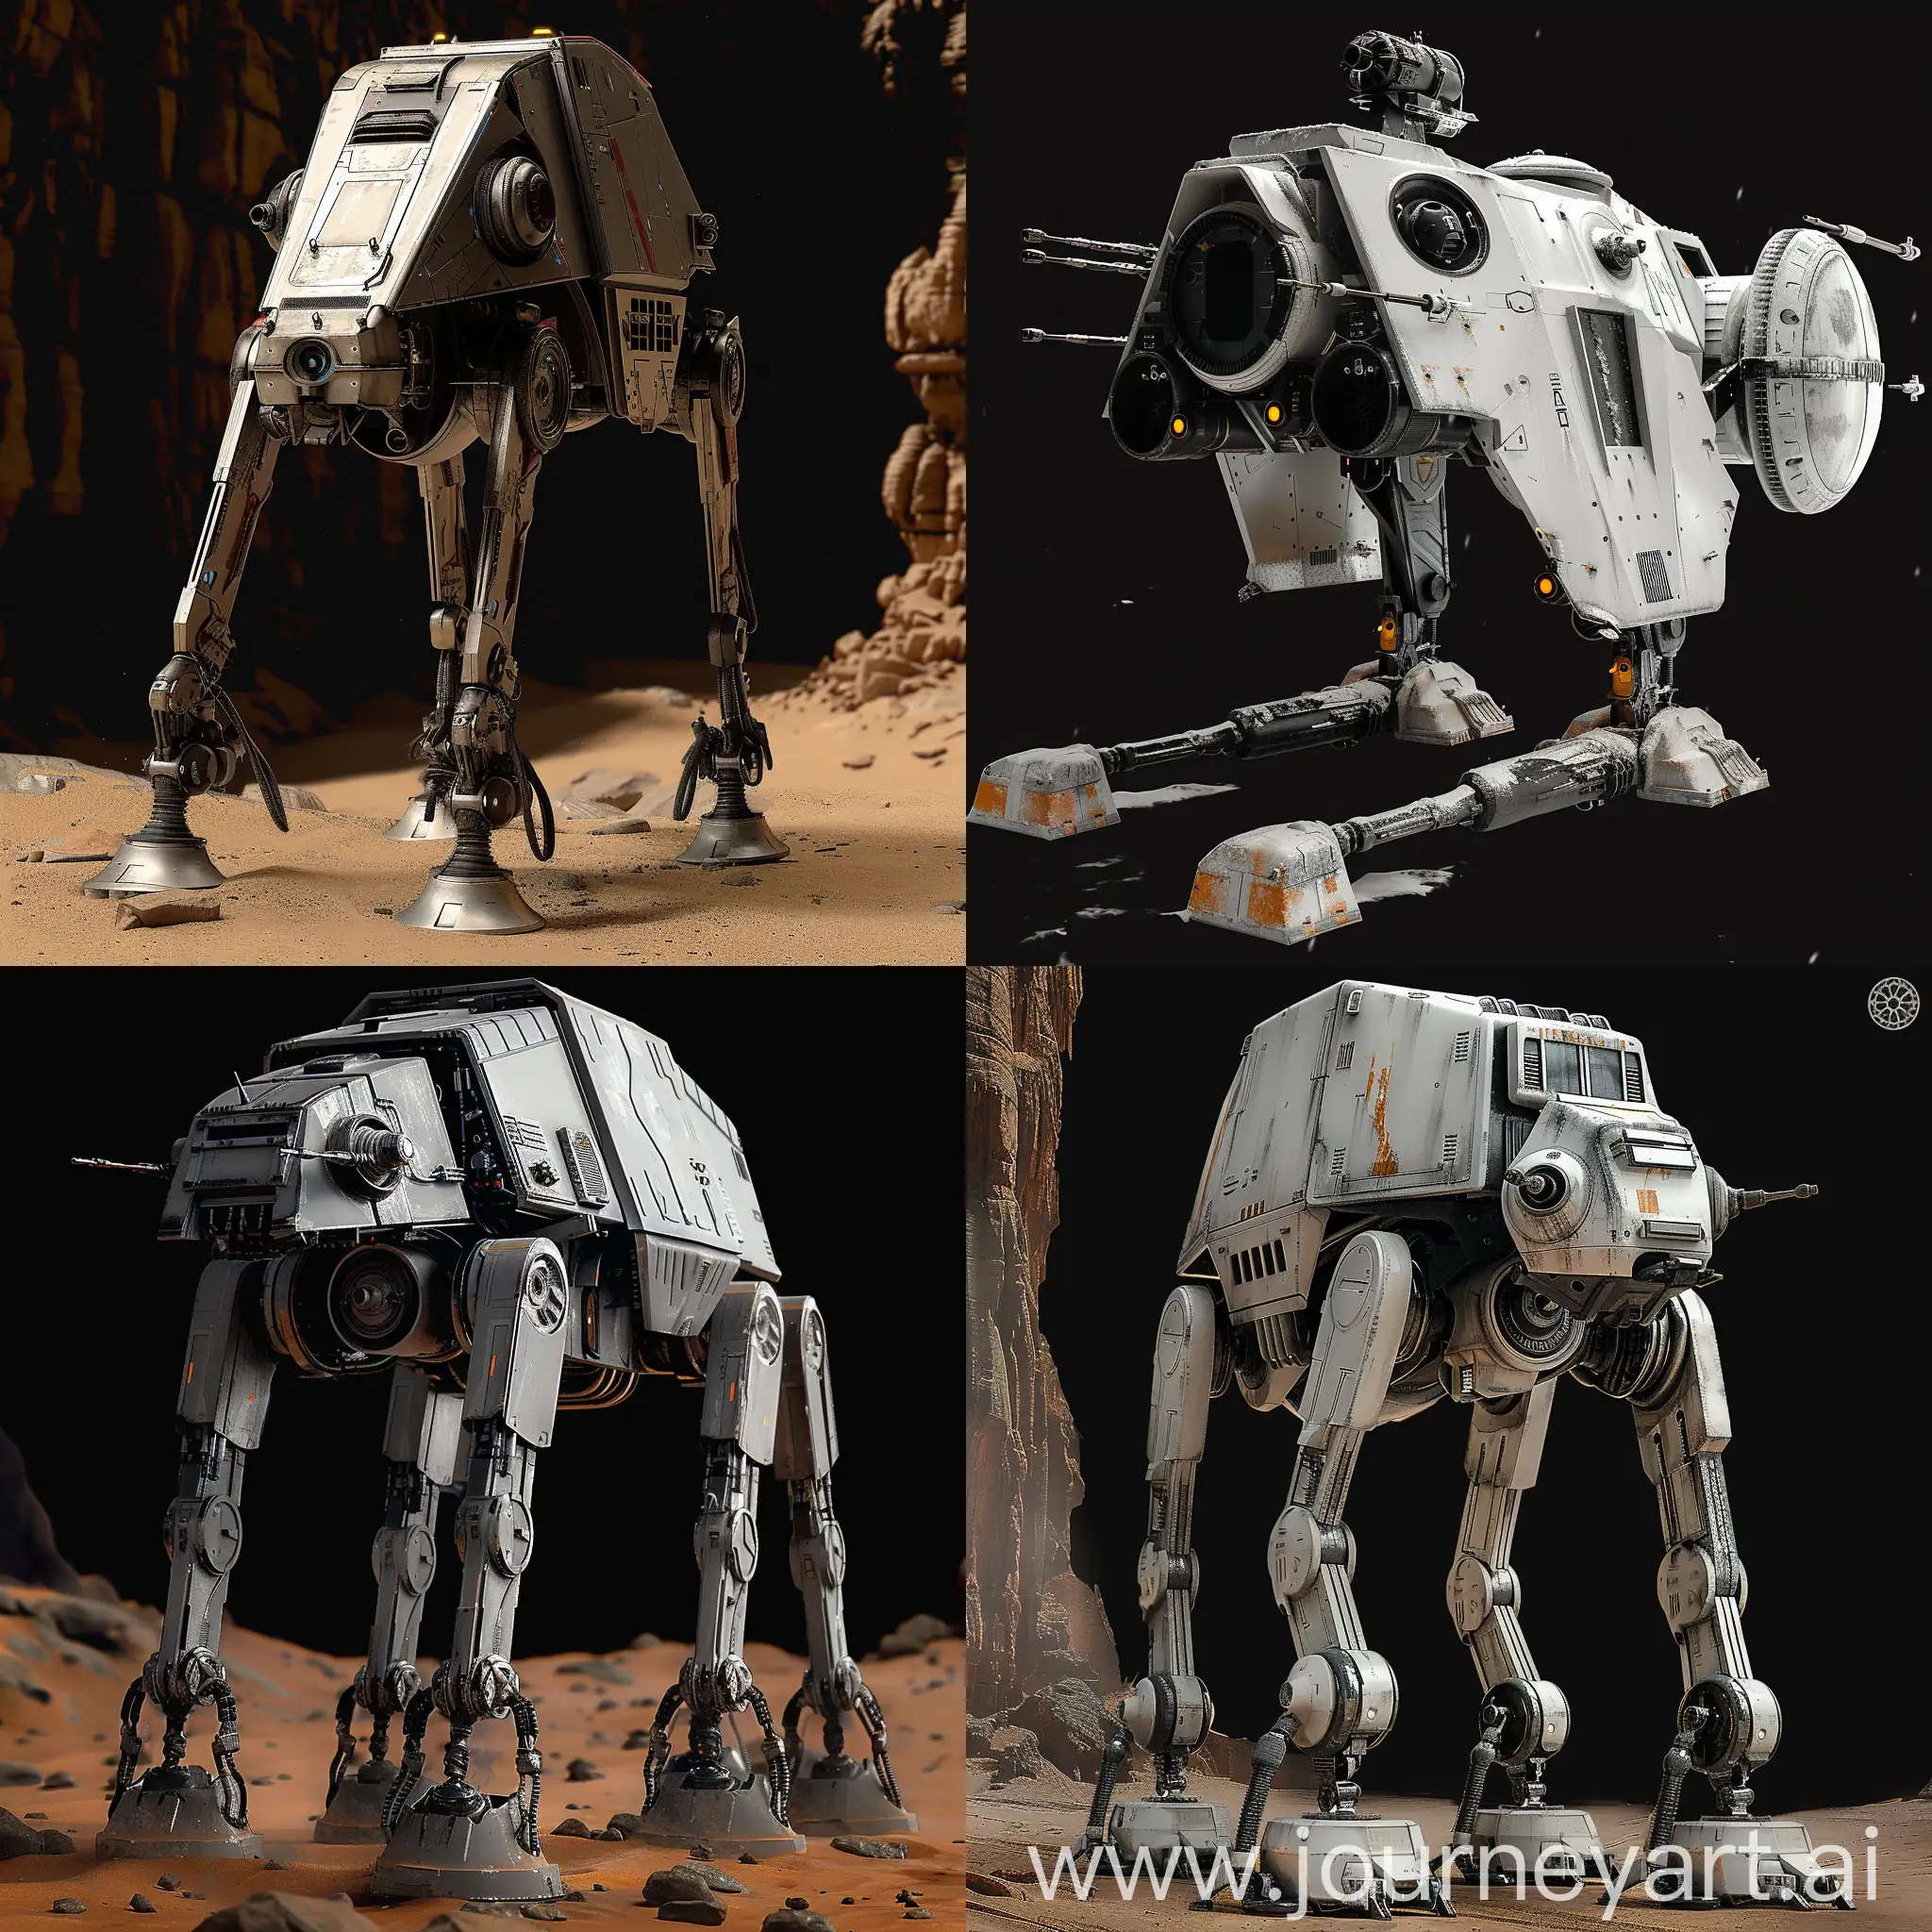 Futuristic-Star-Wars-All-Terrain-Scout-Transport-with-Advanced-Features